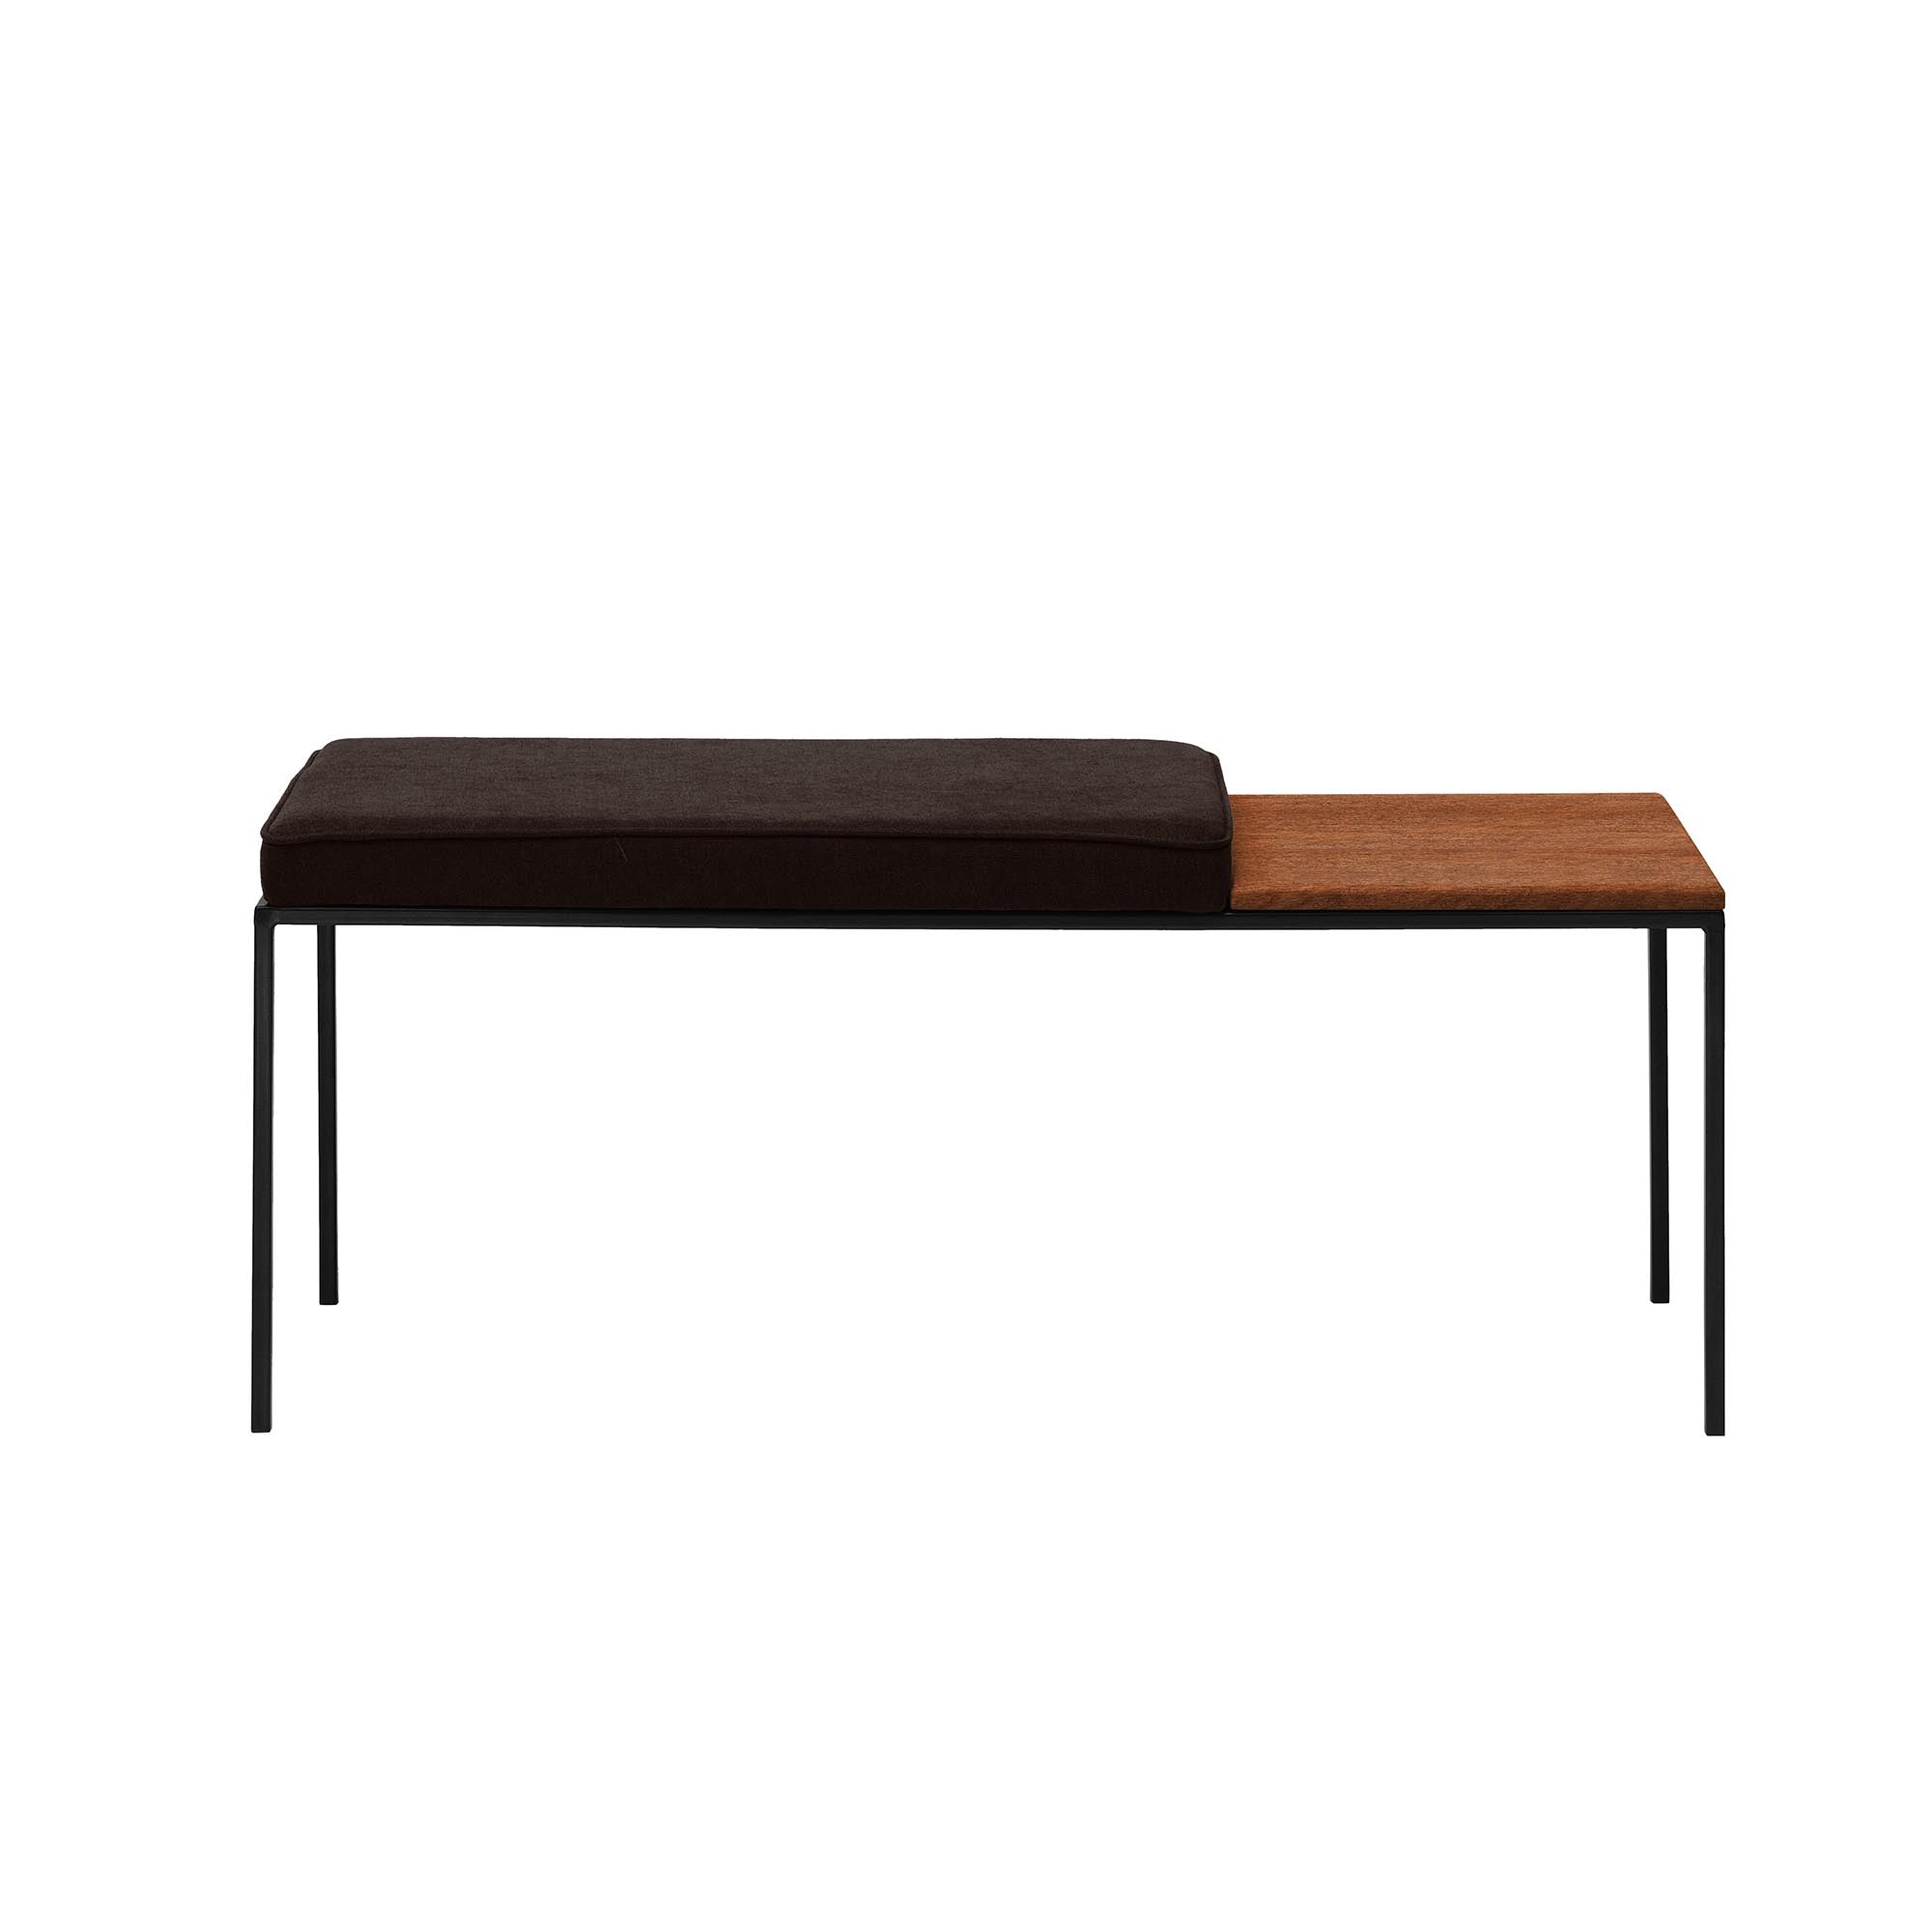 Beech Wood Seat, Walnut Colour brown fabric, black frame, front view